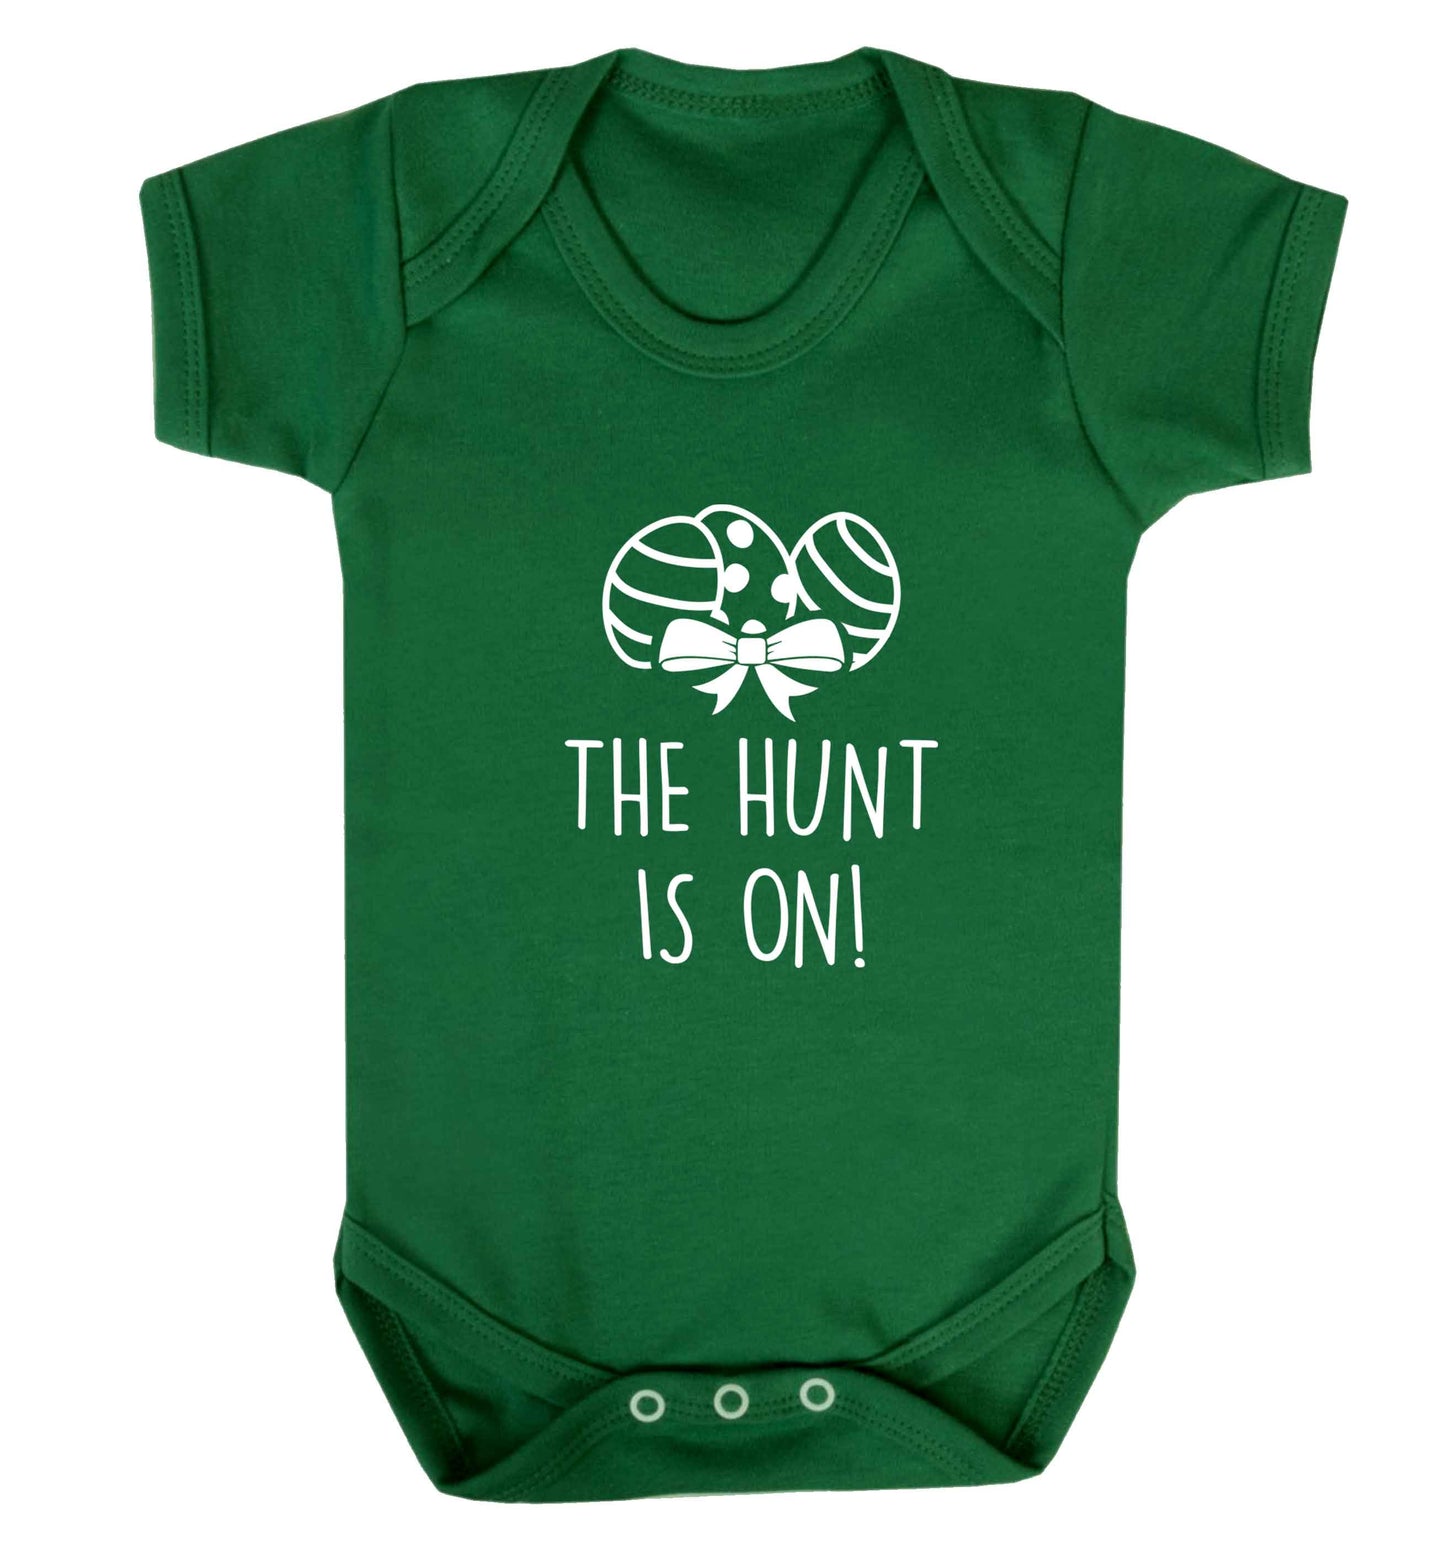 The hunt is on baby vest green 18-24 months